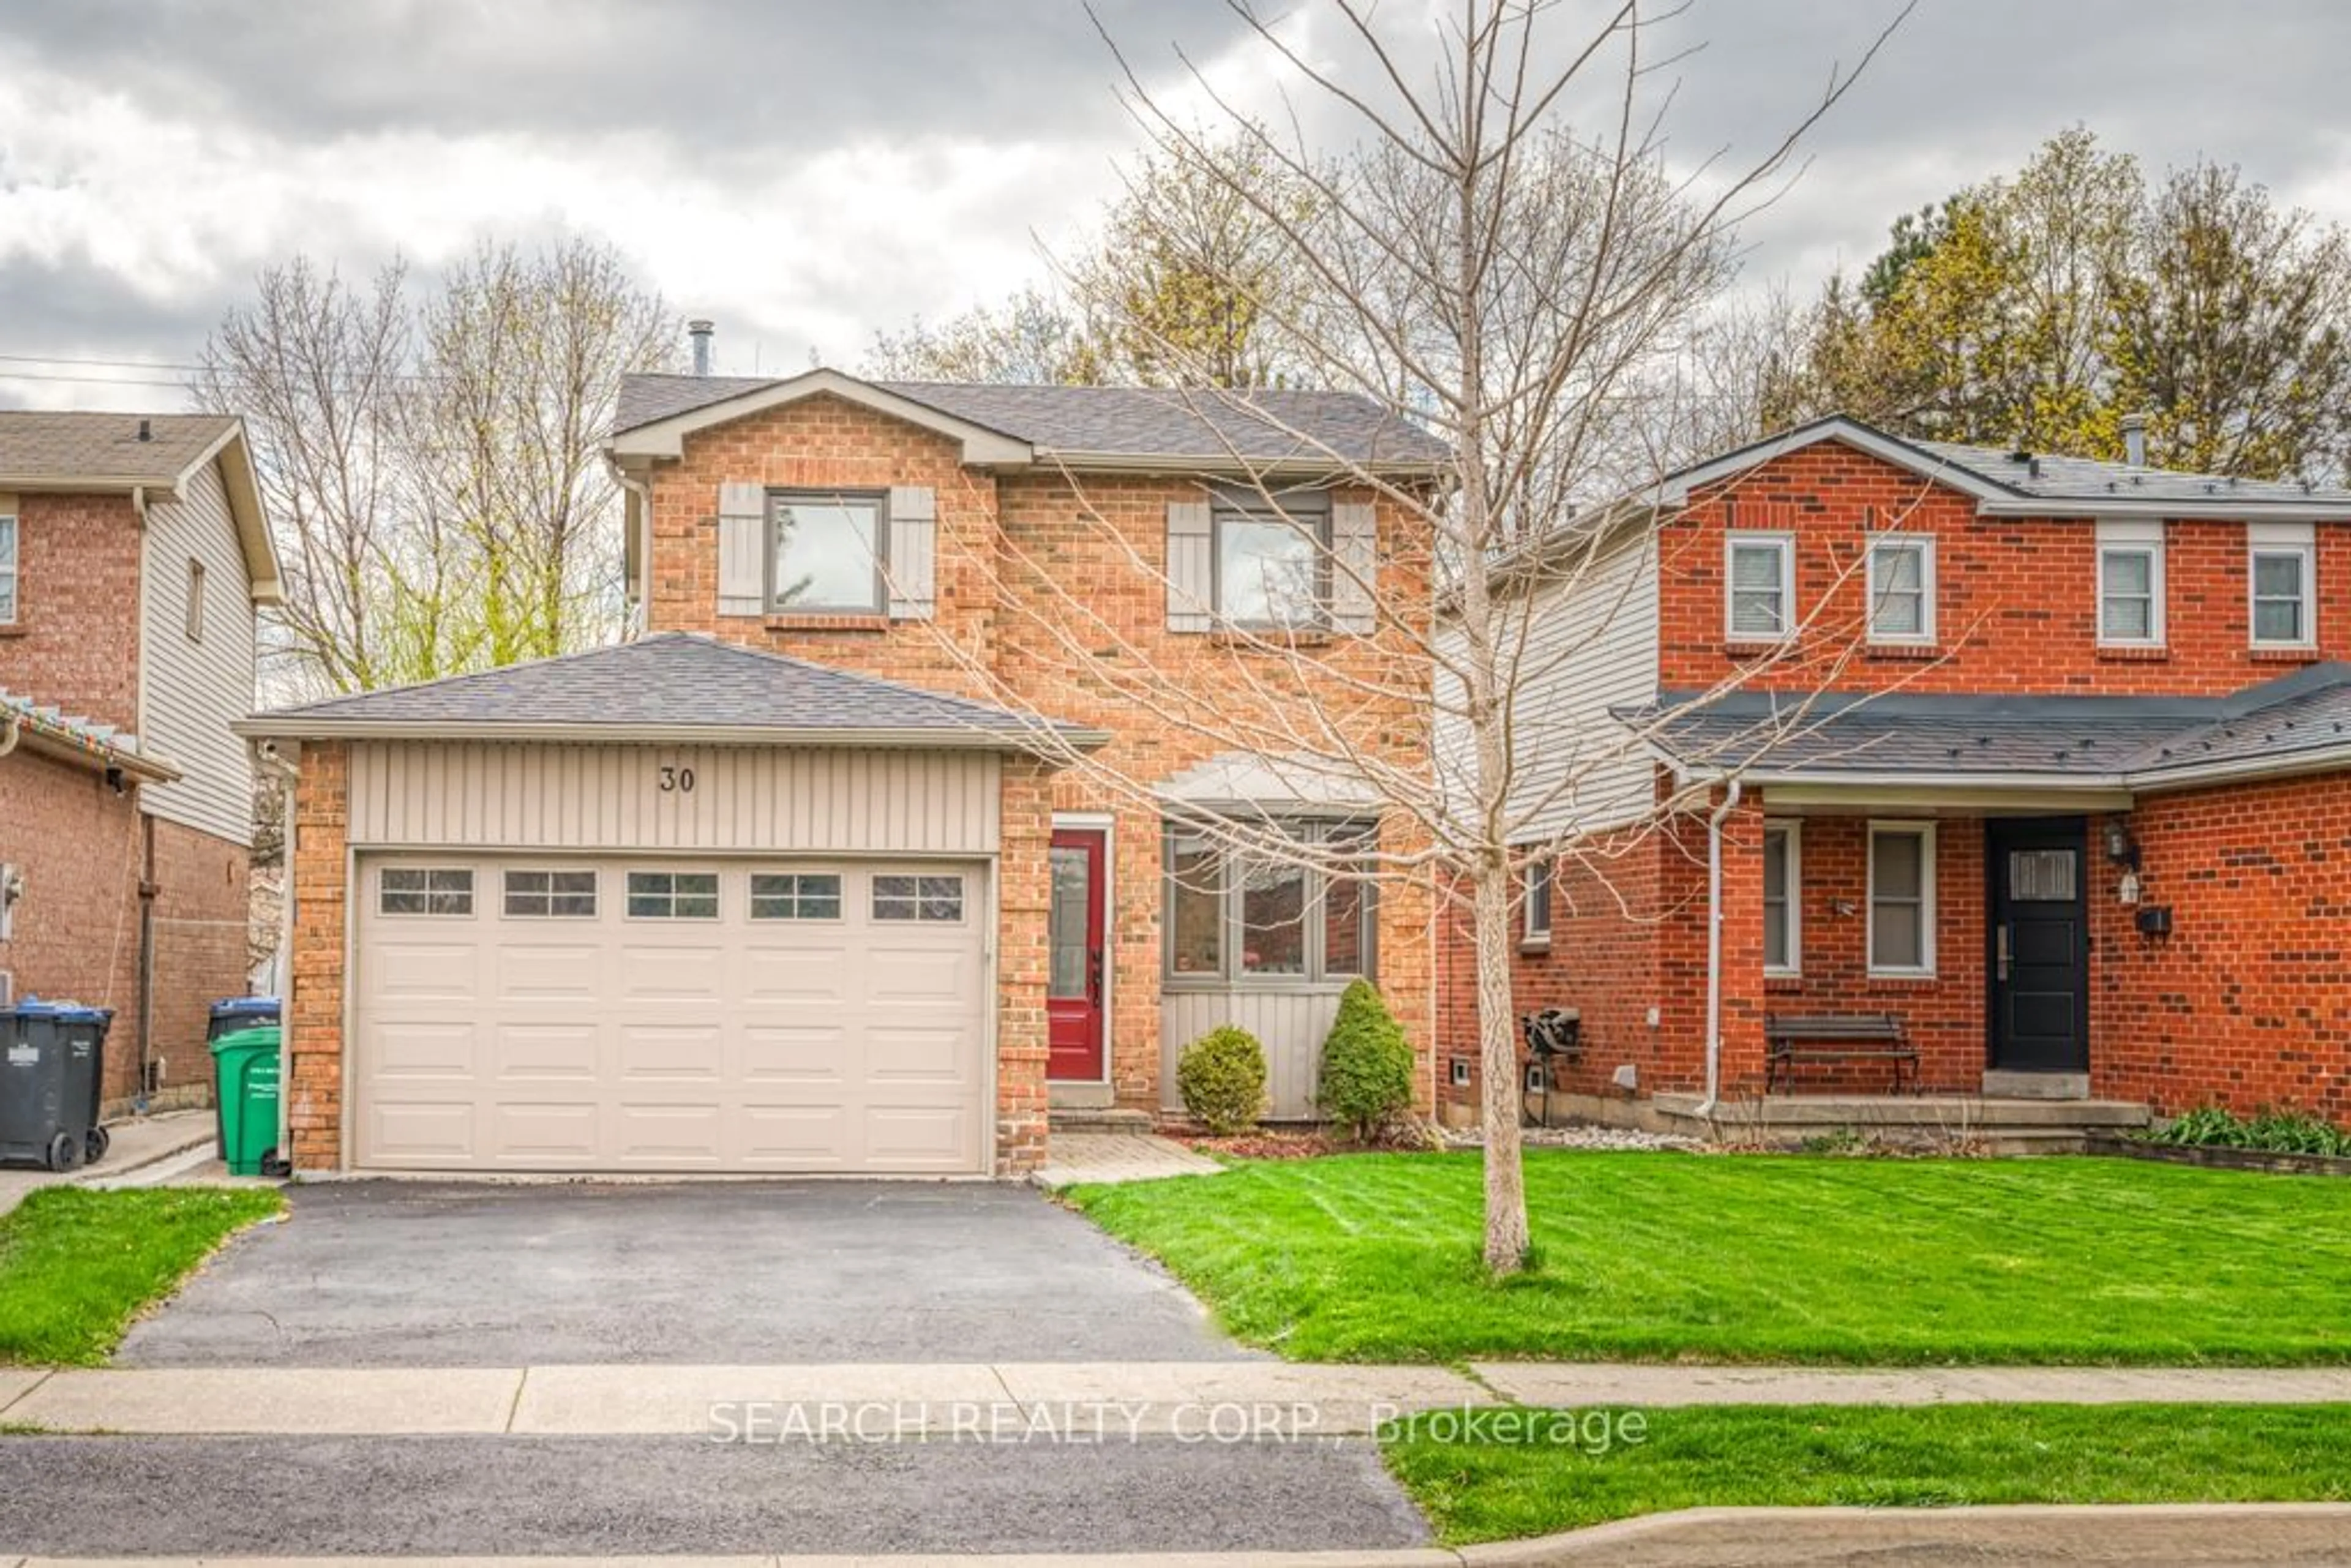 Home with brick exterior material for 30 Driftwood Cres, Brampton Ontario L6Z 2C4